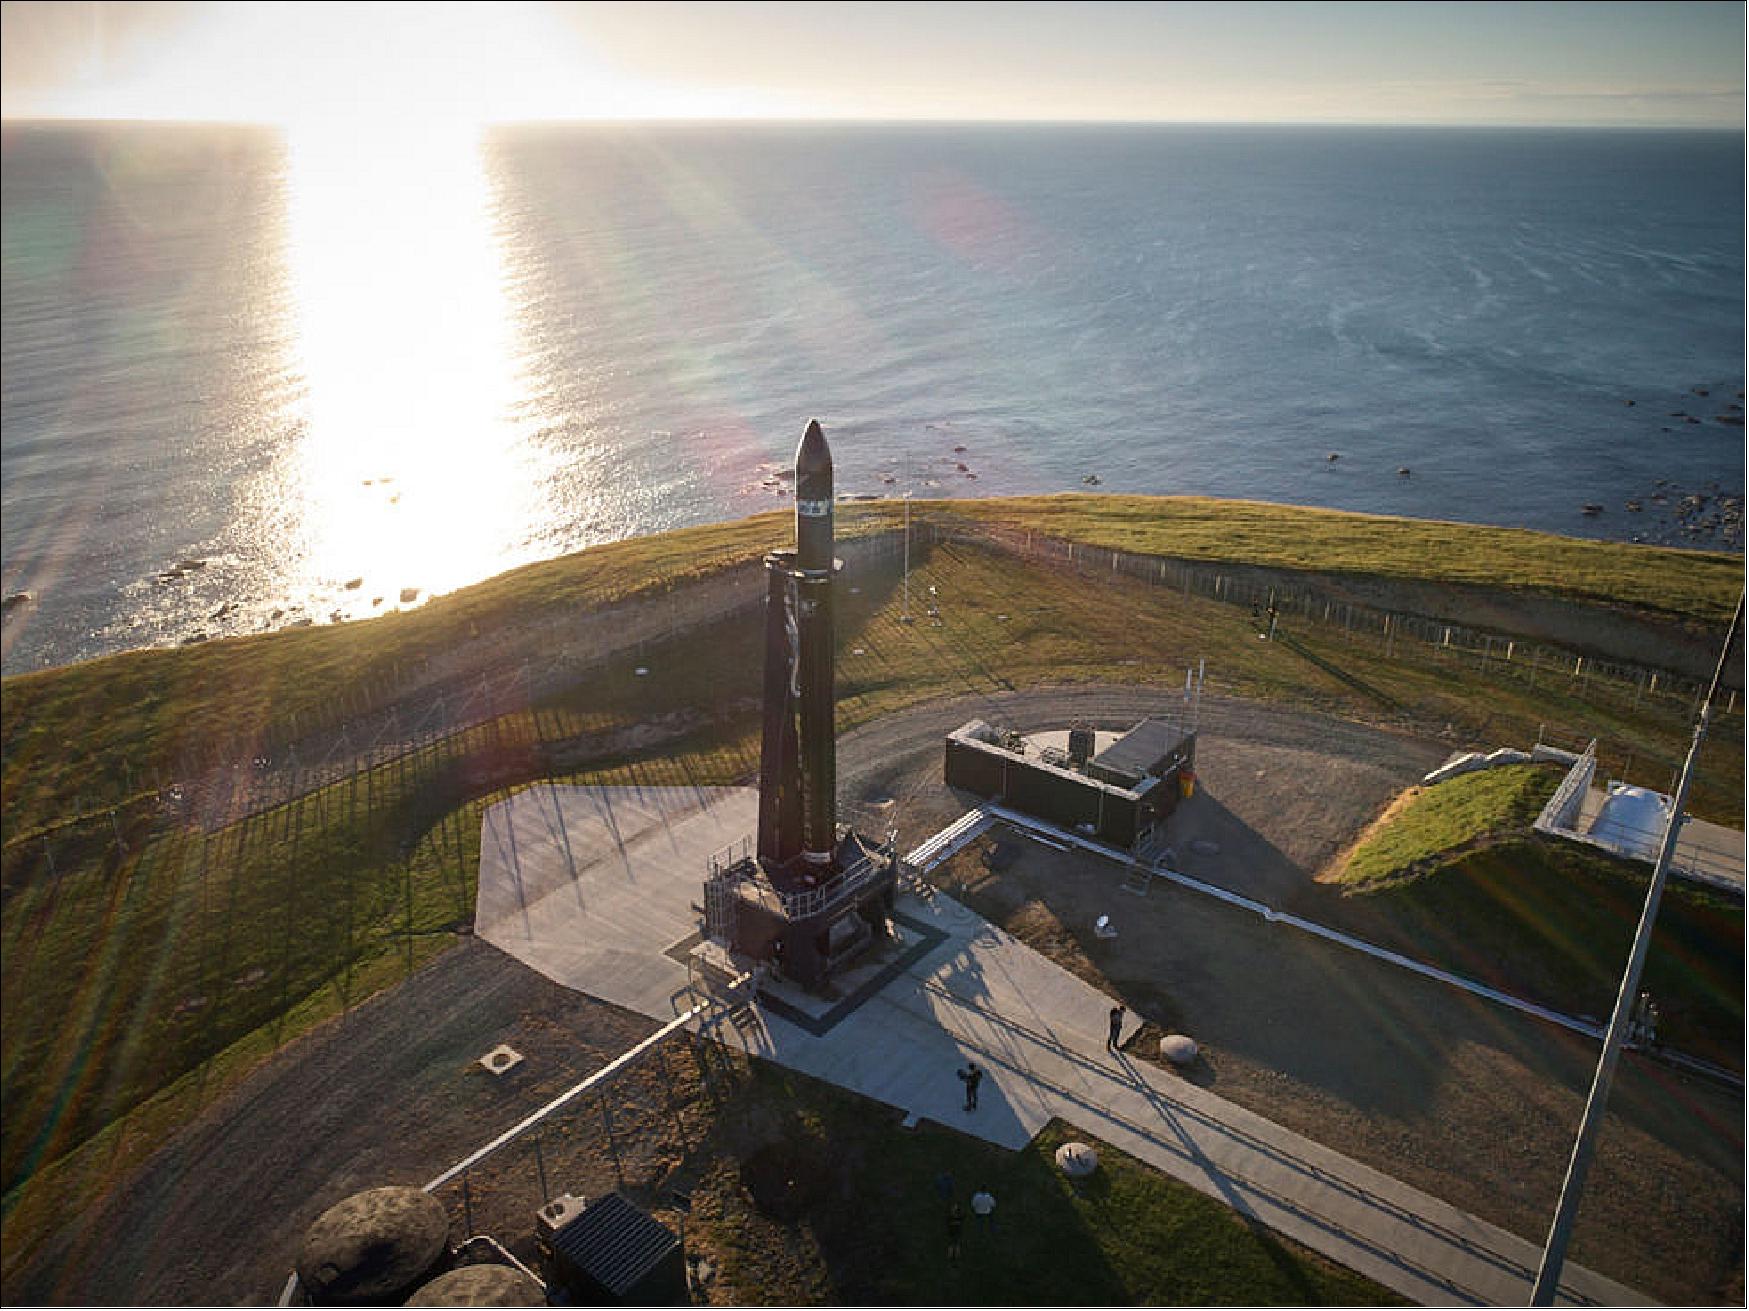 Figure 62: The Electron vehicle 'Still Testing' on the launch pad on Mahia Peninsula in New Zealand (image credit: Rocket Lab)